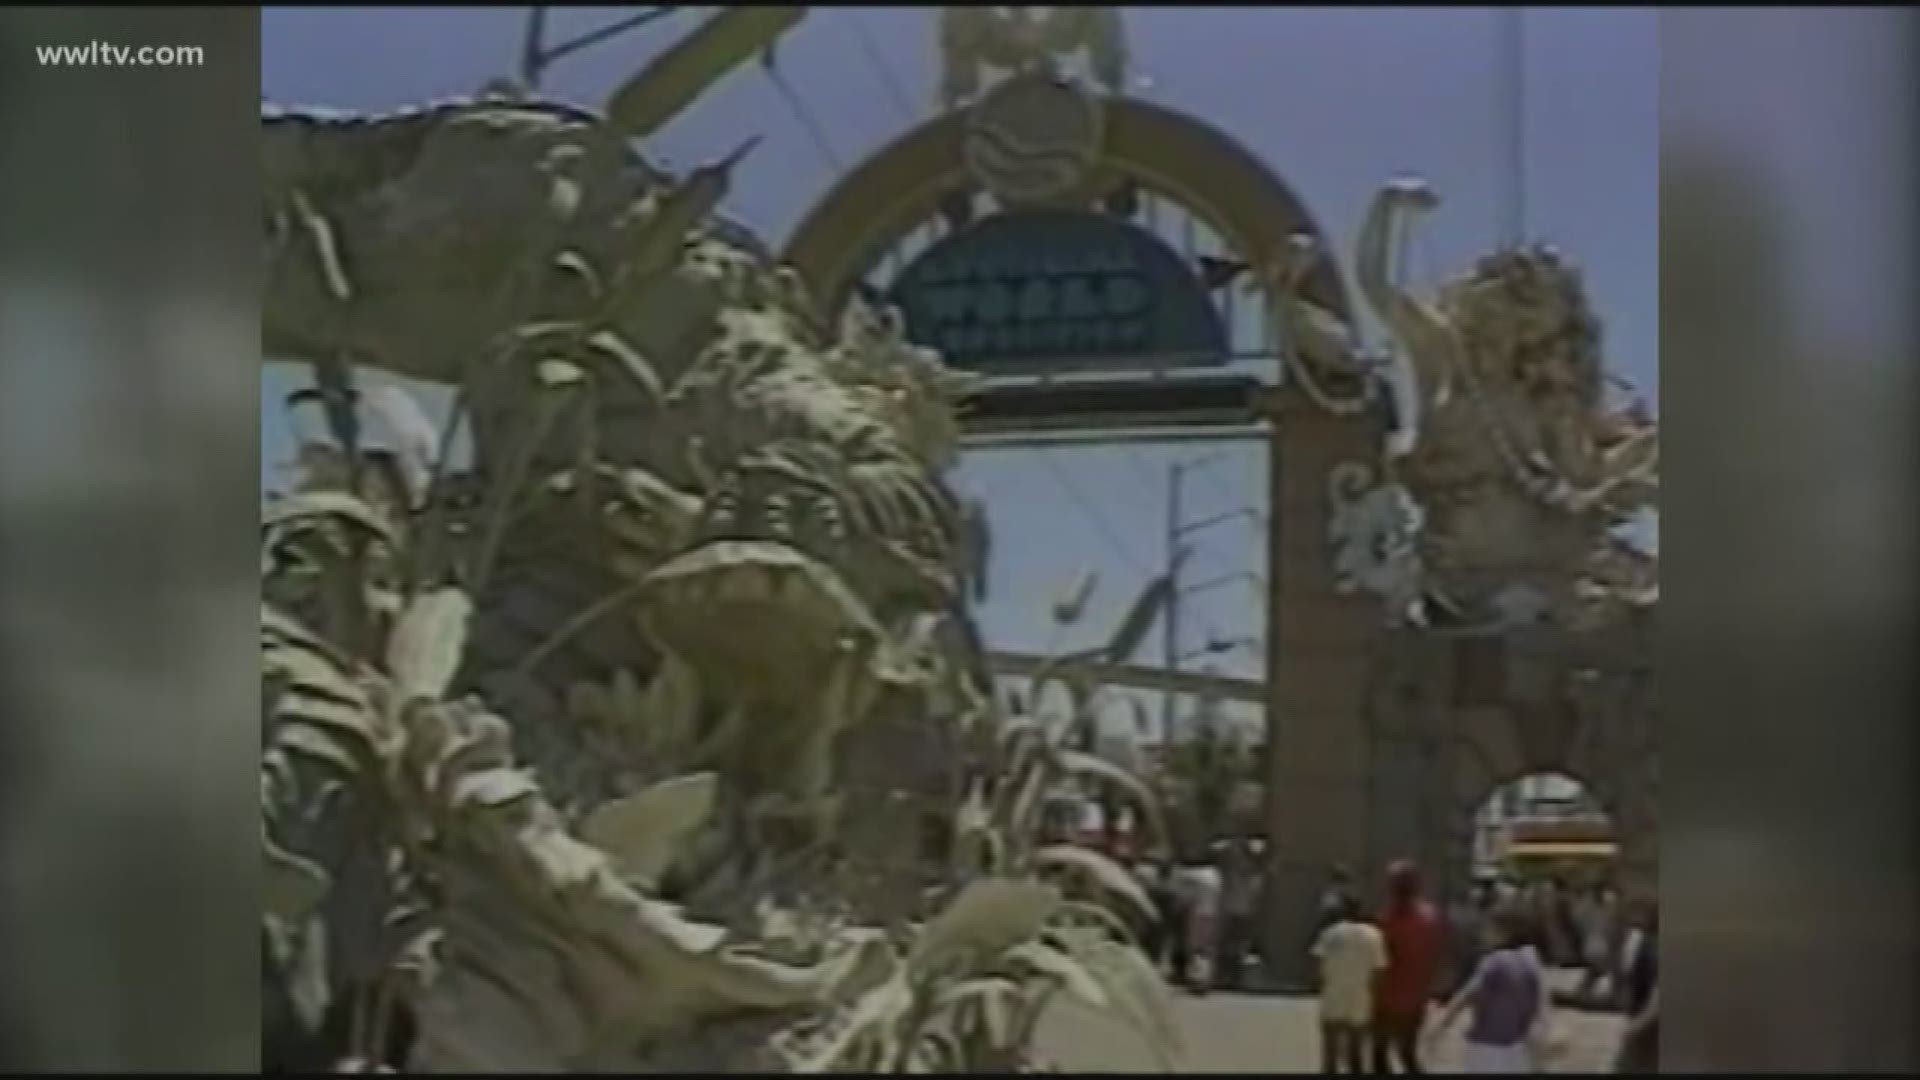 Bill Capo's WWL-TV report on the opening day of the 1984 World's Fair - May 12, 1984.